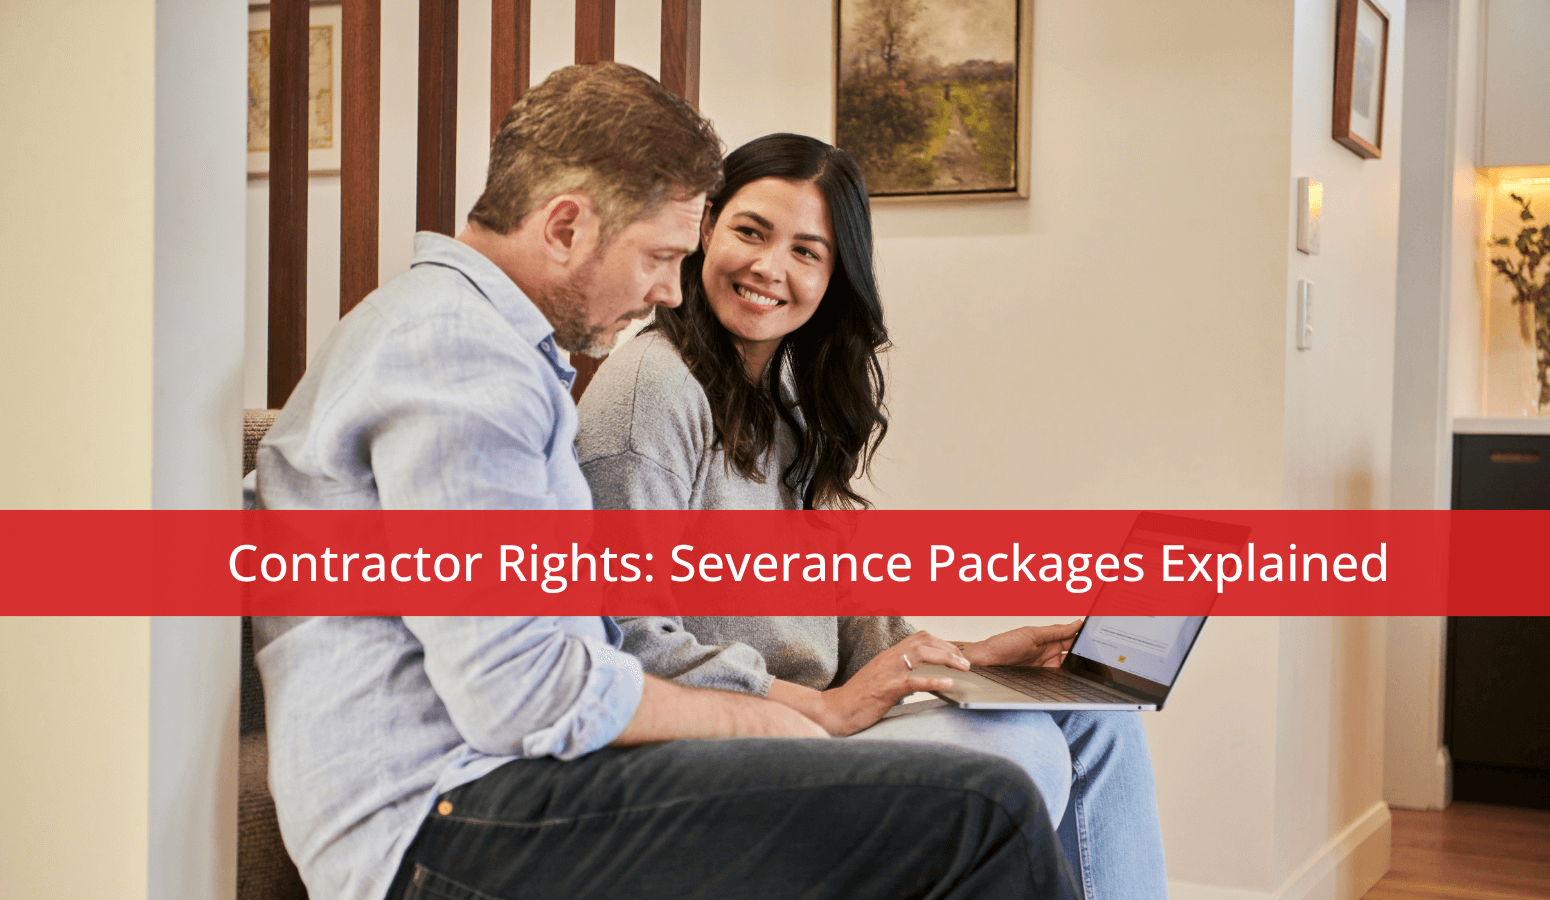 Featured image for “Contractor Rights: Severance Packages Explained”